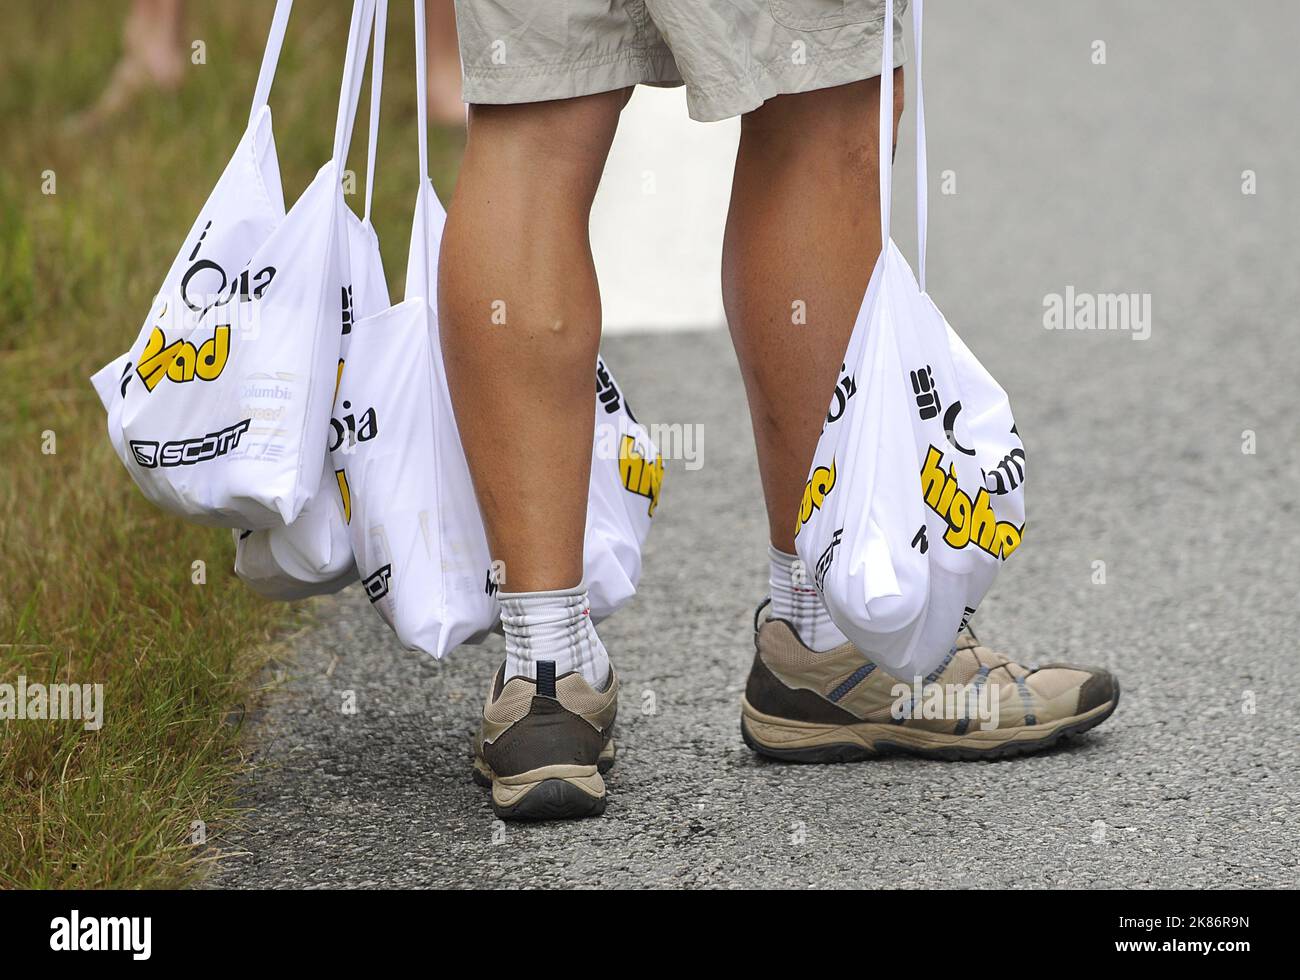 A memeber of Columbia-HTC holds food bags in his hands during the tenth stage of the Tour de France between Limoges and Issoudun Stock Photo